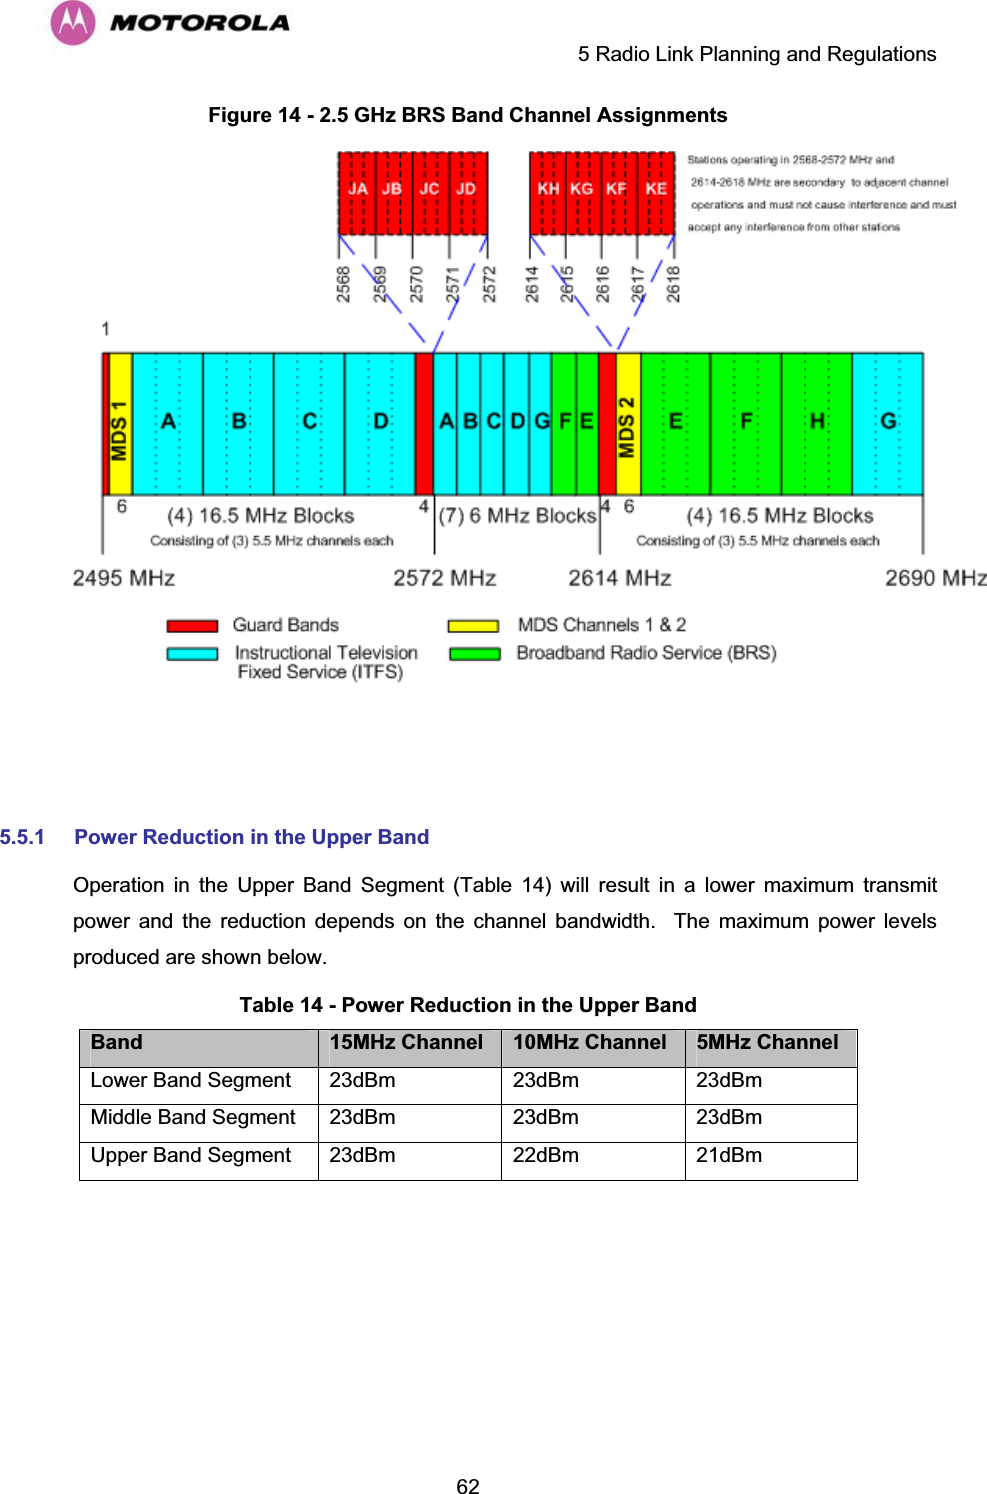     5 Radio Link Planning and Regulations  62Figure 14 - 2.5 GHz BRS Band Channel Assignments   5.5.1 Power Reduction in the Upper Band Operation in the Upper Band Segment (Table 14) will result in a lower maximum transmit power and the reduction depends on the channel bandwidth.  The maximum power levels produced are shown below. Table 14 - Power Reduction in the Upper Band Band 15MHz Channel  10MHz Channel  5MHz Channel Lower Band Segment  23dBm  23dBm  23dBm Middle Band Segment  23dBm  23dBm  23dBm Upper Band Segment  23dBm  22dBm  21dBm 